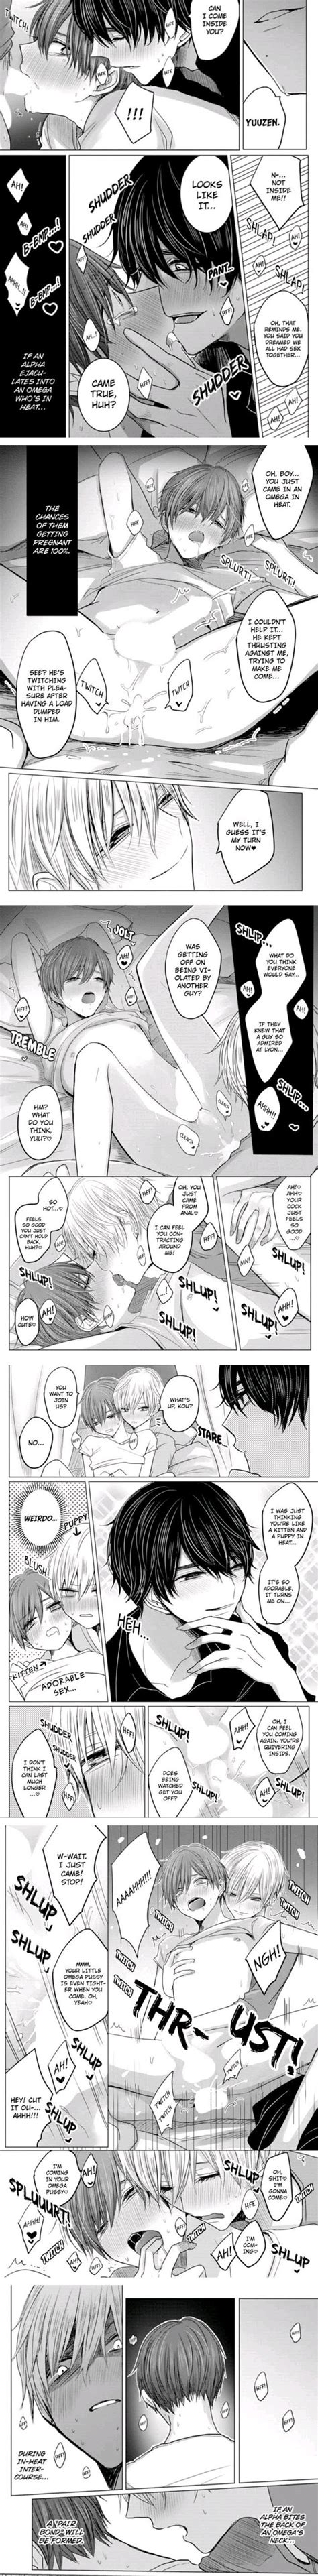 Read Theres No Way This Is Fate Manga English Online Latest Chapters